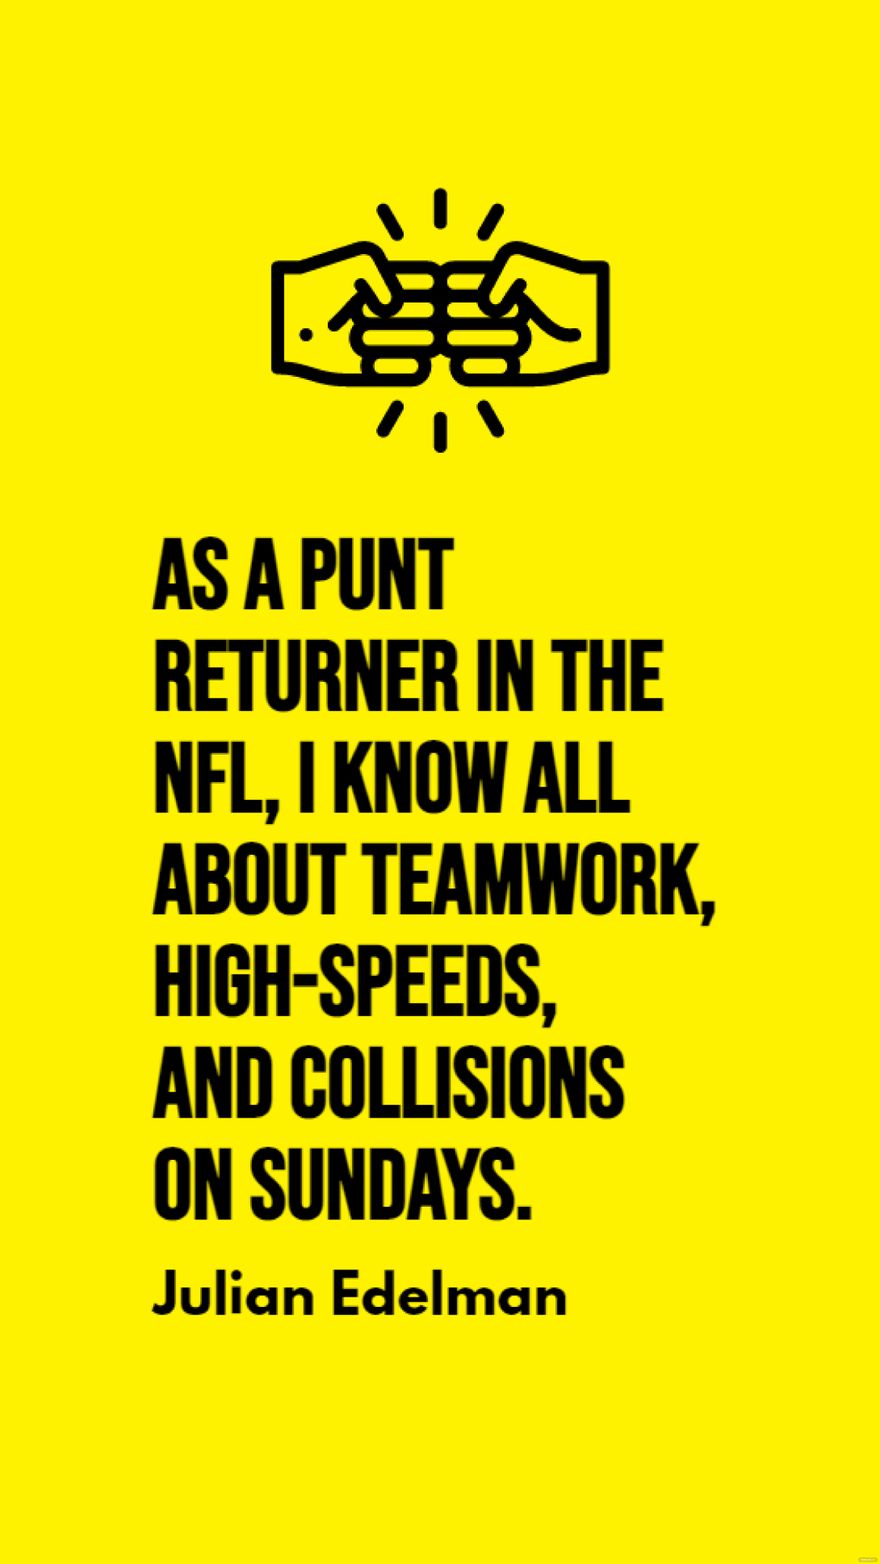 Julian Edelman - As a punt returner in the NFL, I know all about teamwork, high-speeds, and collisions on Sundays.